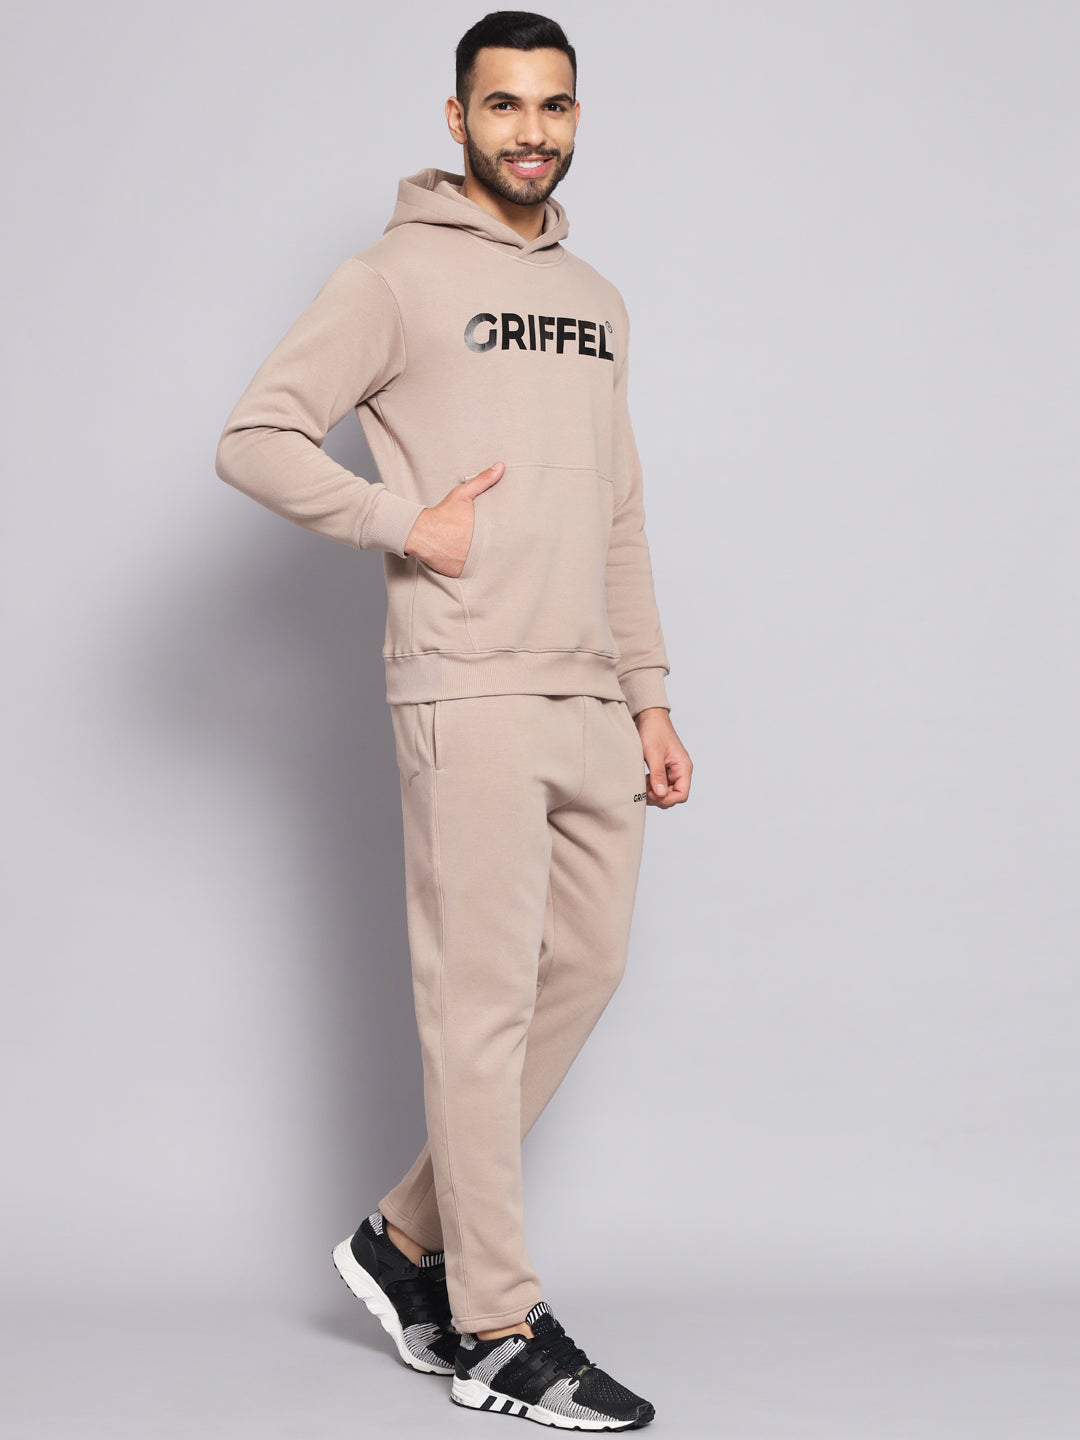 Griffel Men's Front Logo Solid Fleece Basic Hoodie and Joggers Full set Camel Tracksuit - griffel